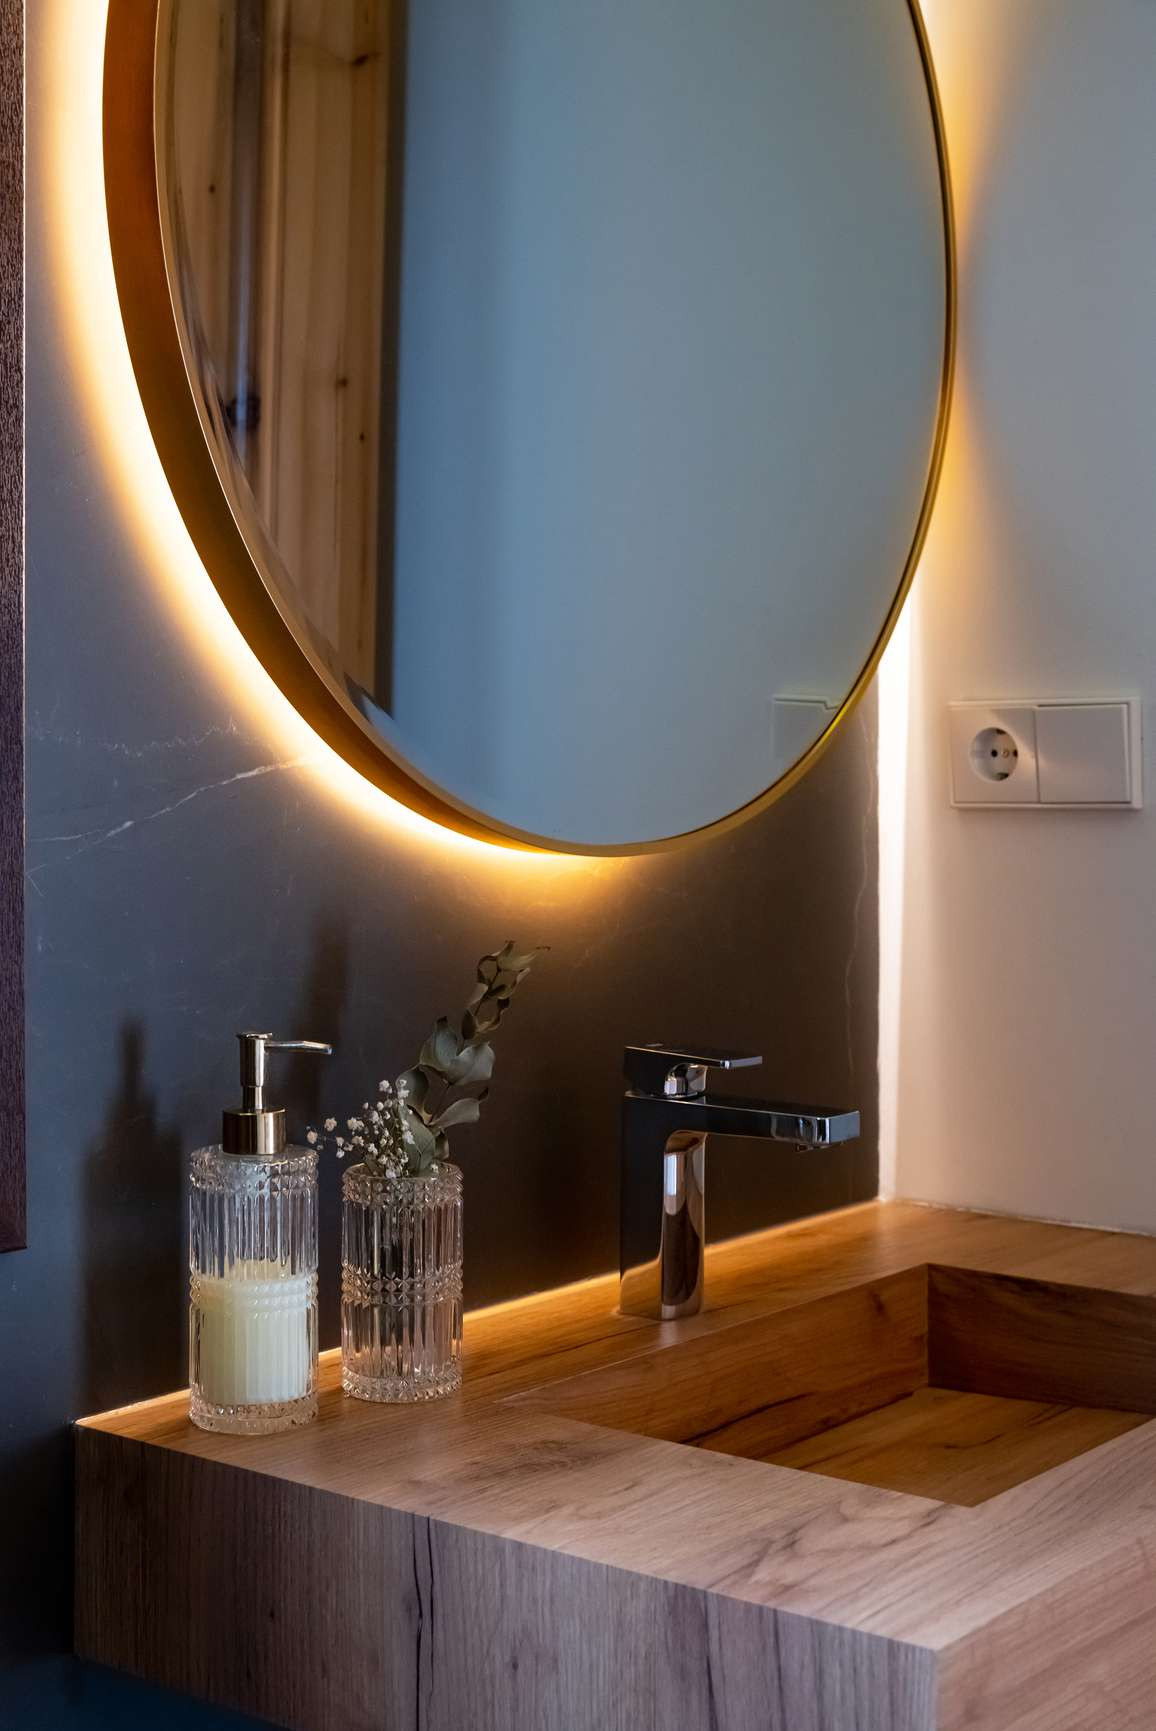 Bathroom Mirror Ideas That Will Dress Up Your Space